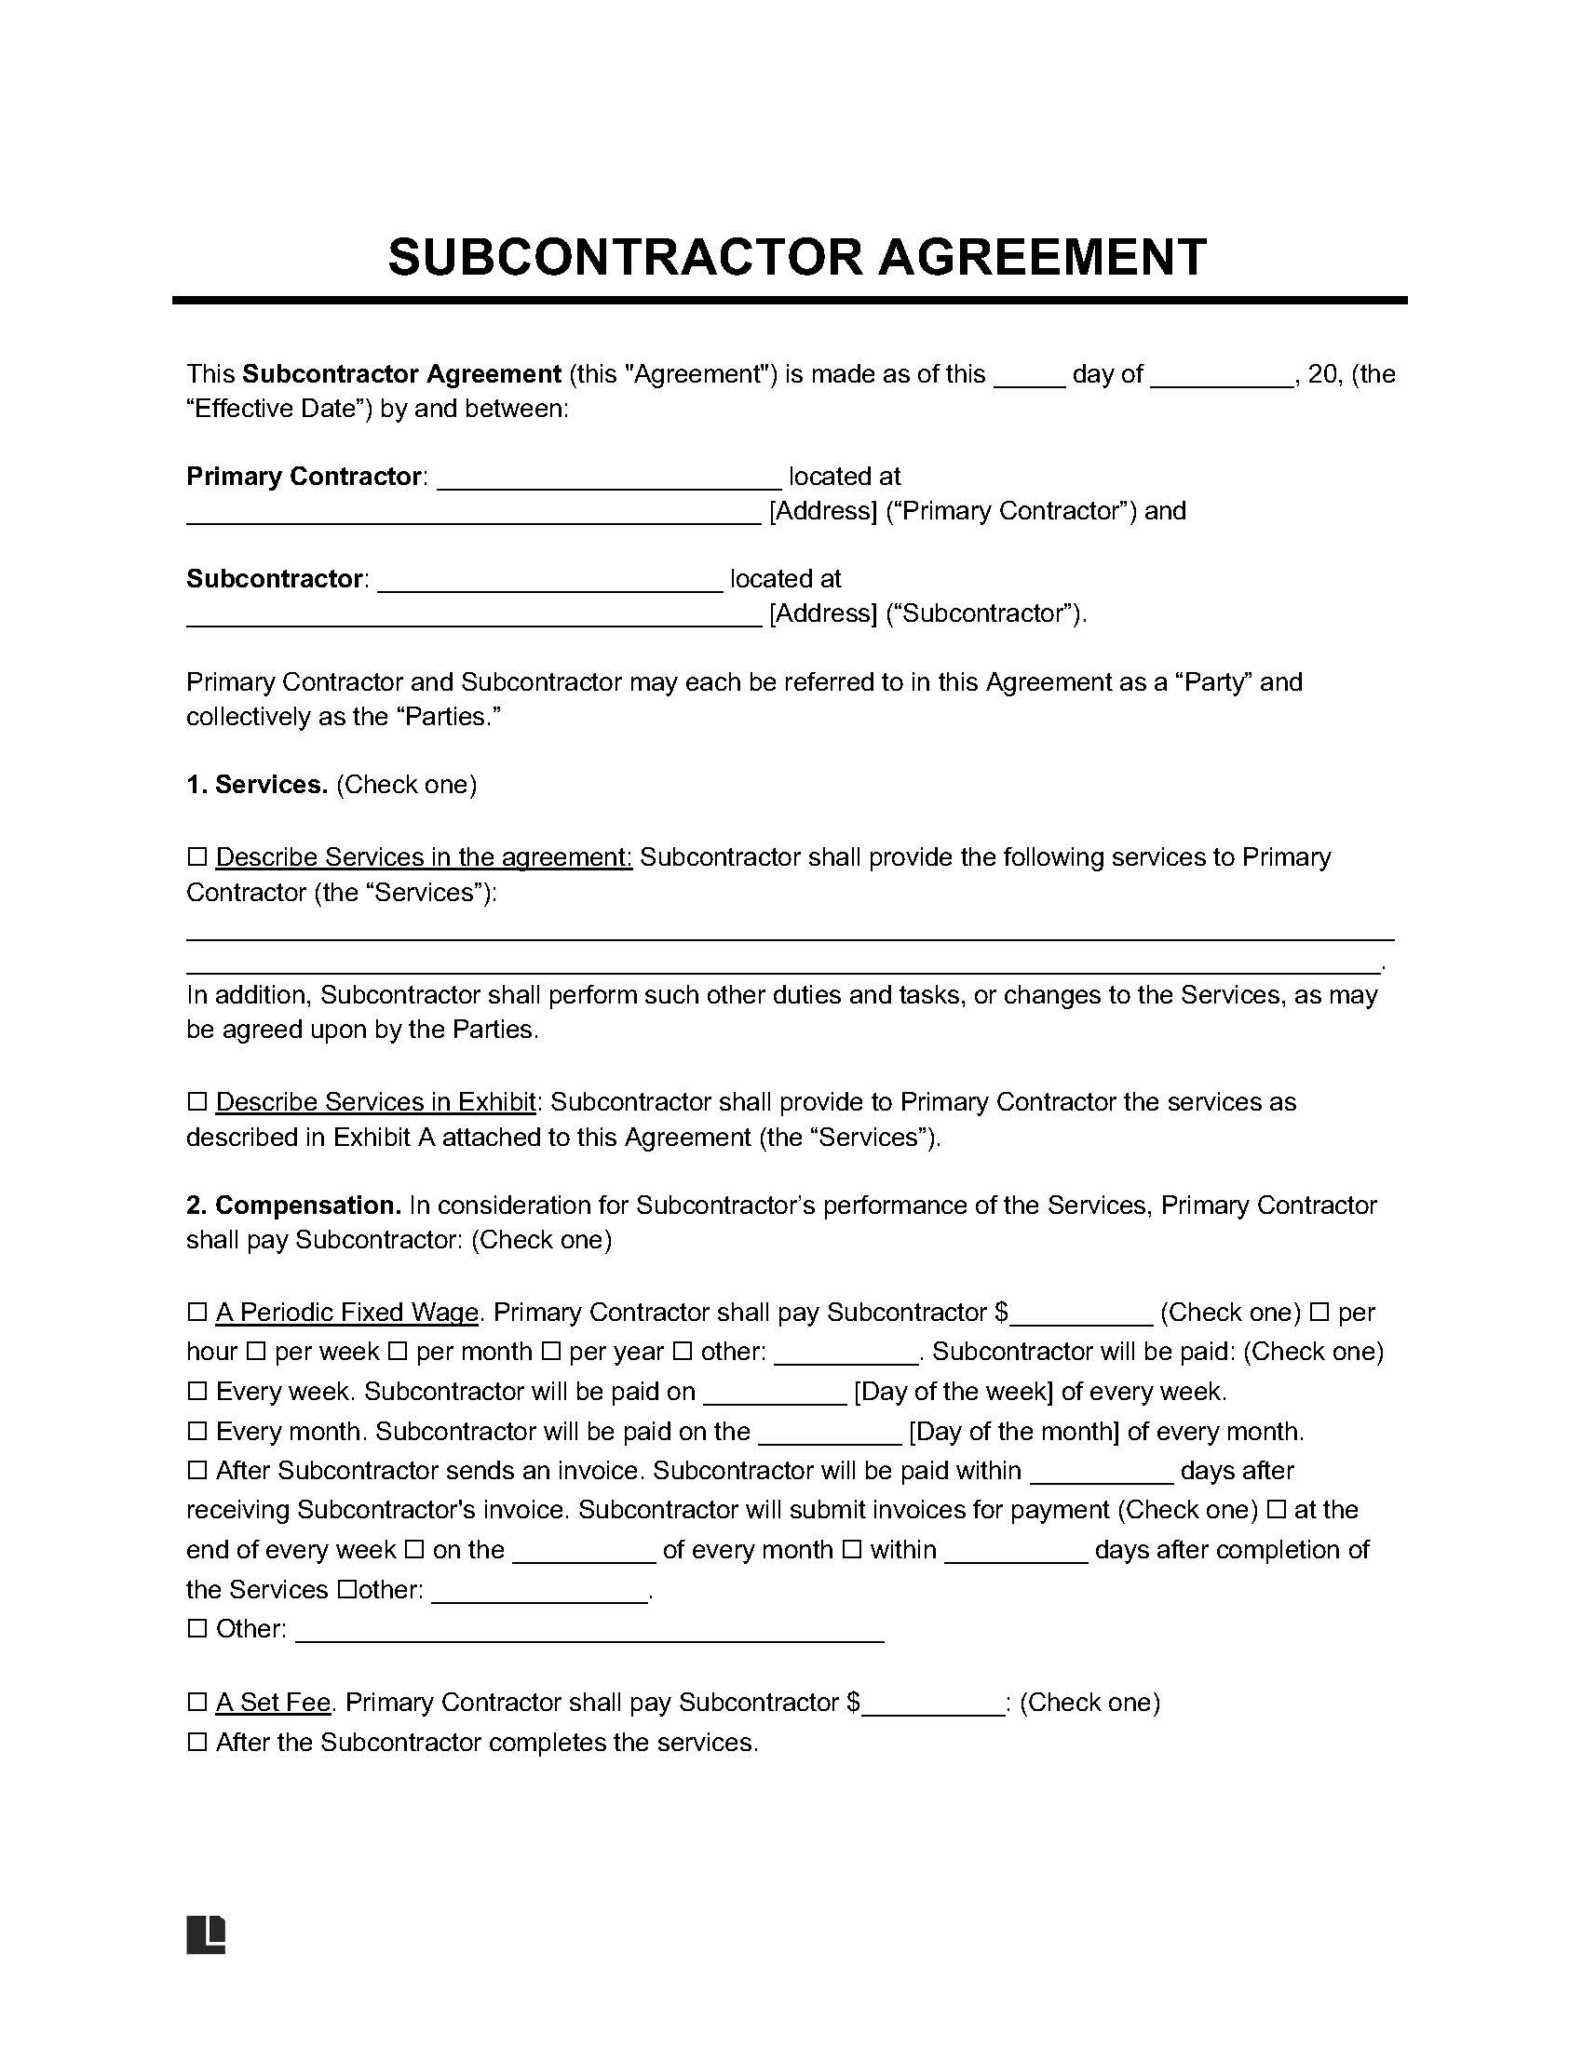 free-subcontractor-agreement-templates-pdf-word